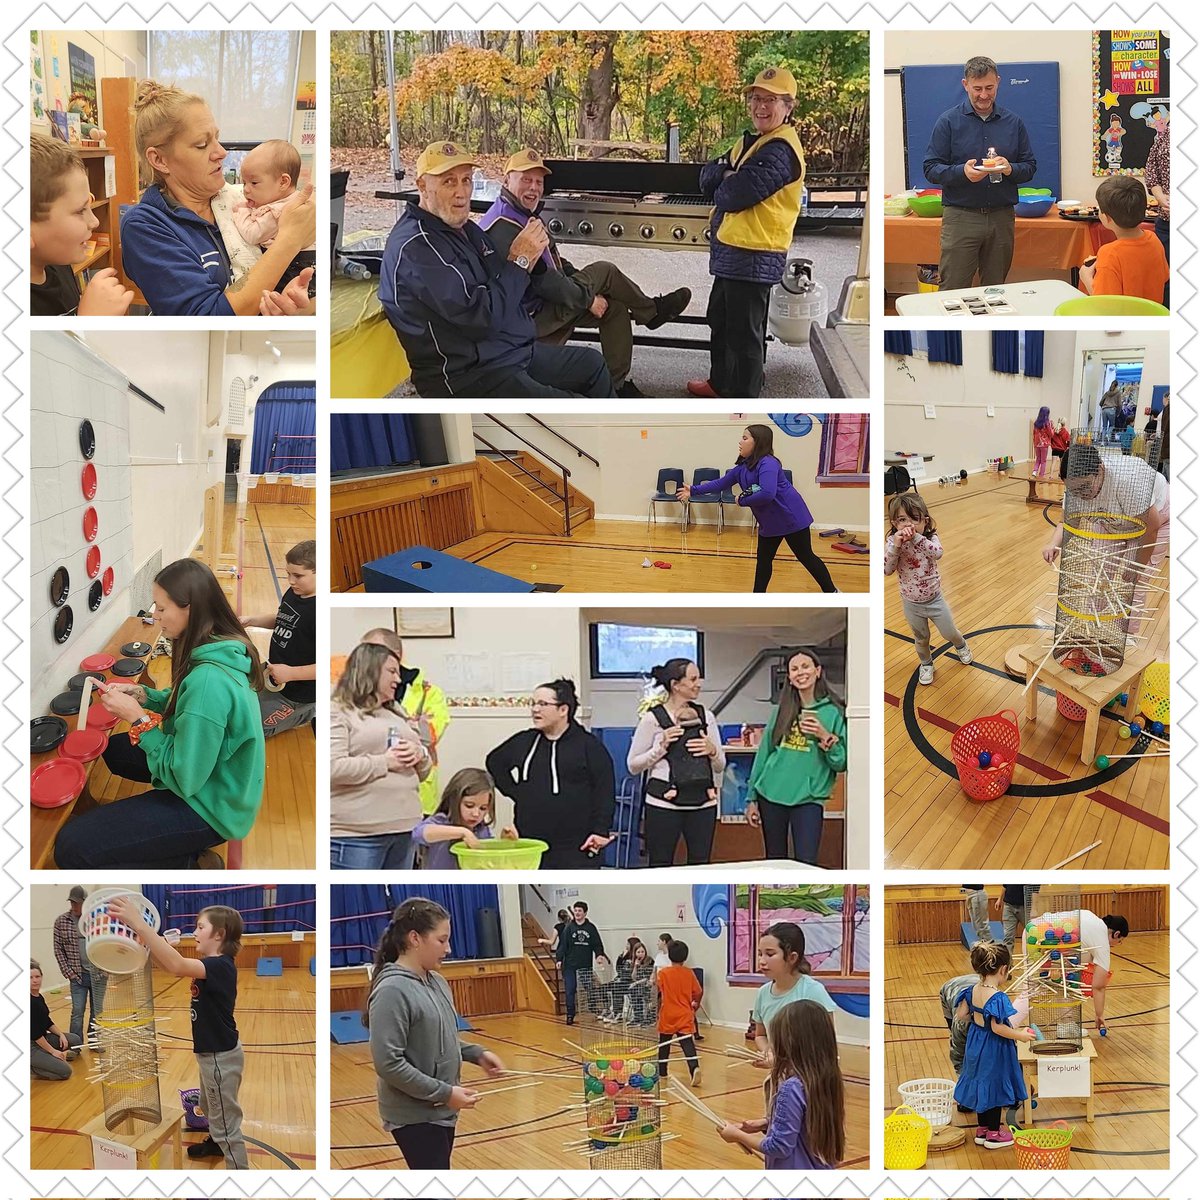 @alcdsb_stpe A fun open house despite the ran with a bbq, games, a birthday song for @KevDorey and a rainy soccer game! Thank you to the Tamworth Lion's Hall for running the bbq and to @soudeme and parent council for the food and set up! 🍀